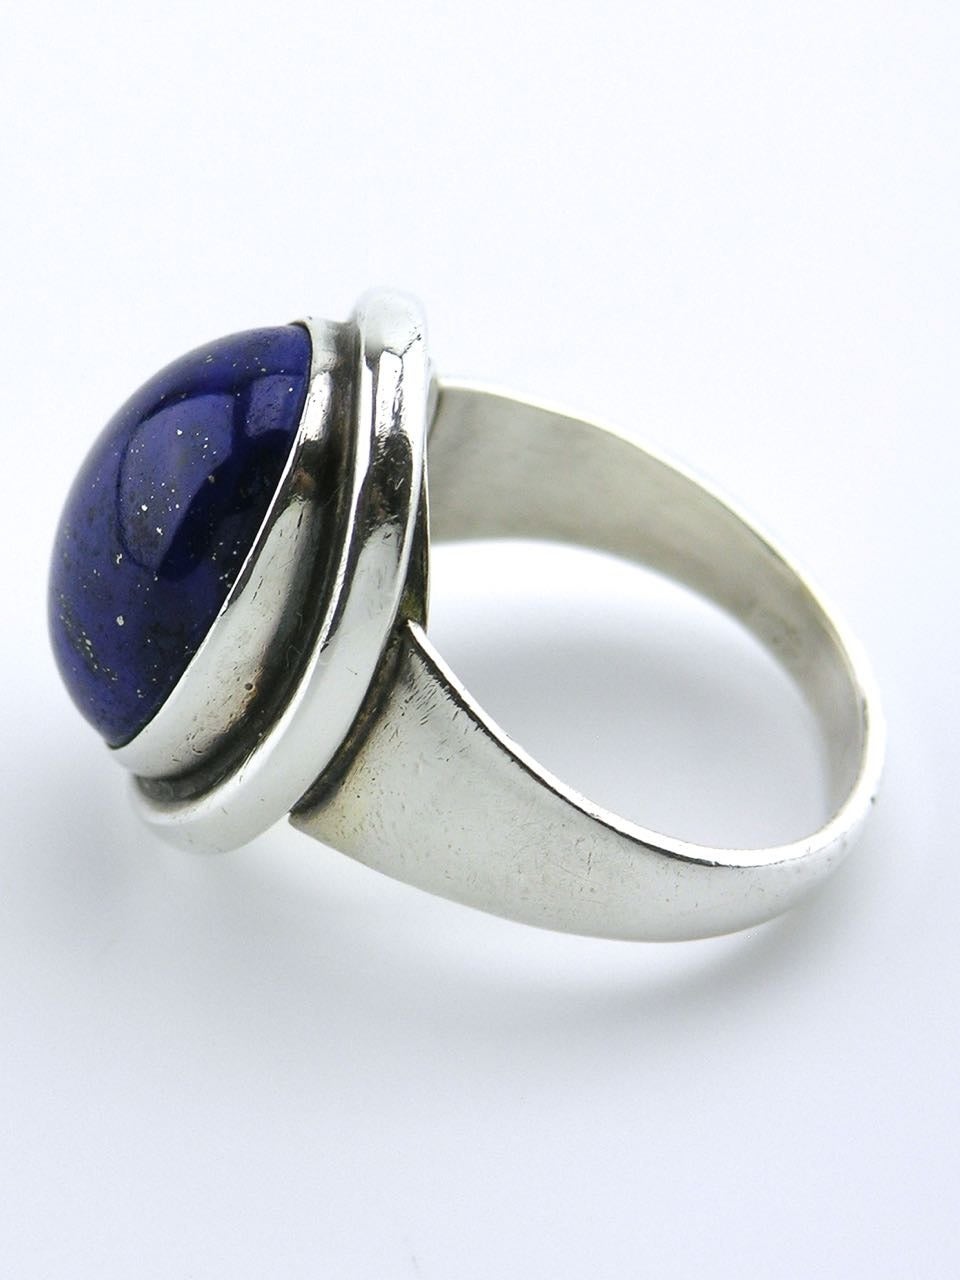 A large oval cabochon of lapis bezel set above a plain wire rim. 

- Marked with post 1945 marks for Georg Jensen of Copenhagen
- Design number 46A by Harald Nielsen
- Current size T (USA 9 5/8) Can be resized if required